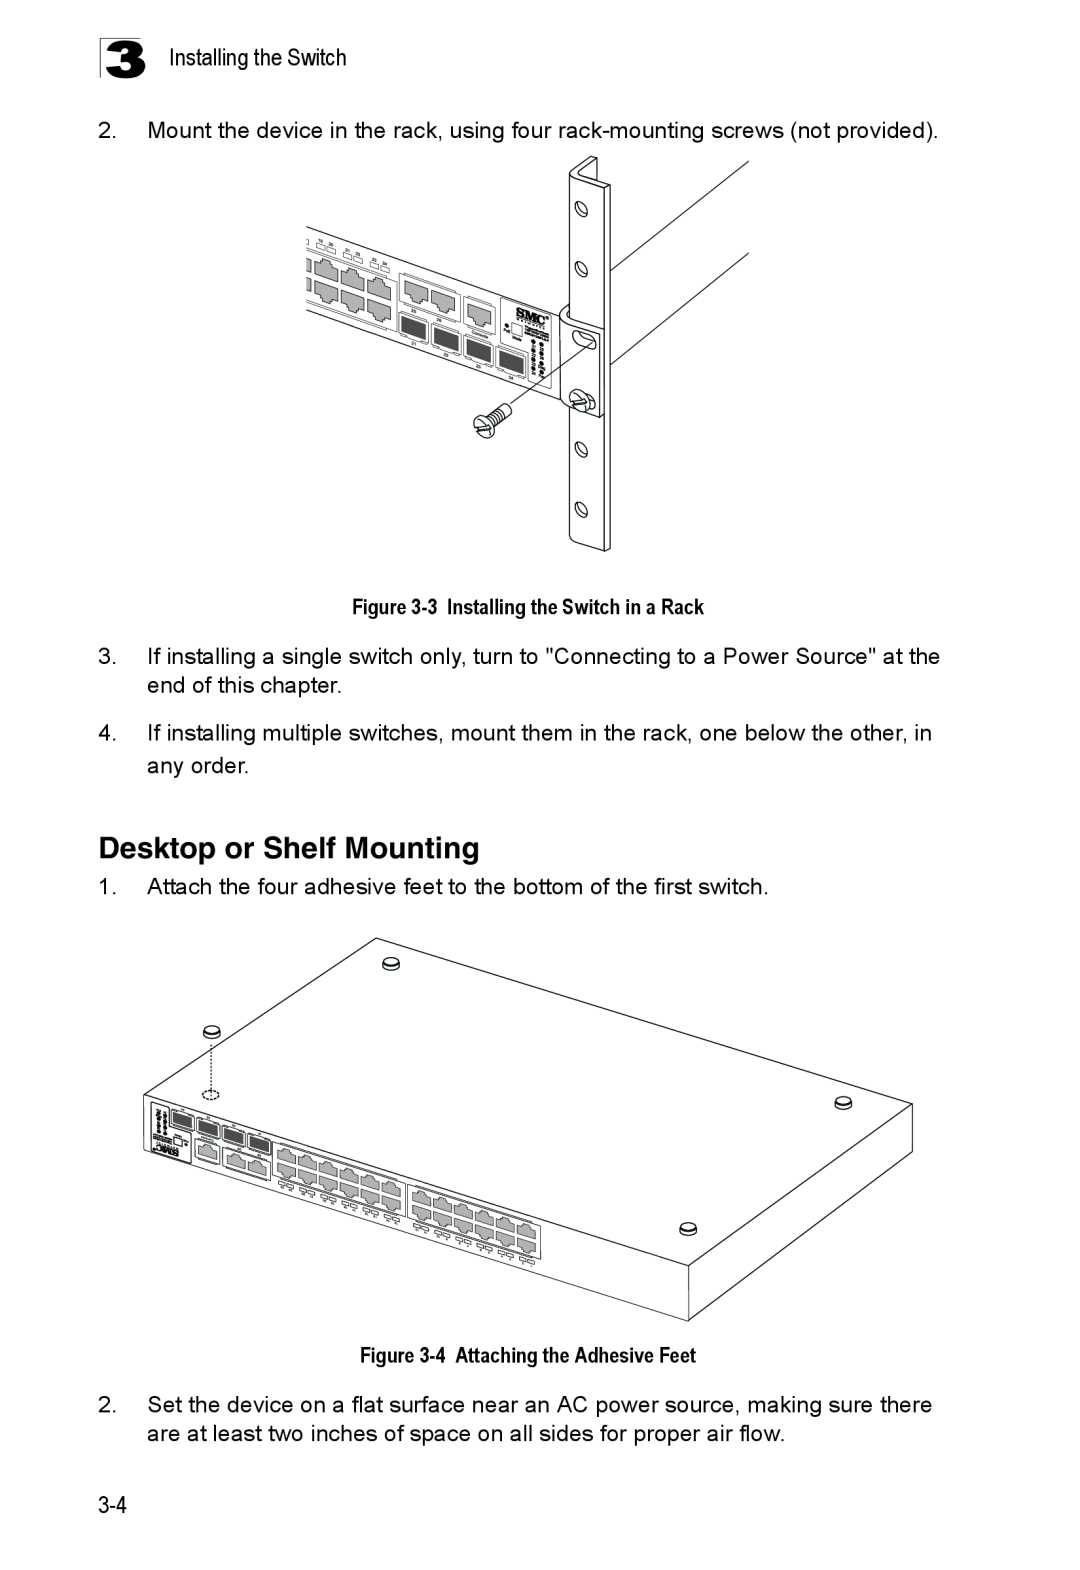 SMC Networks SMC8126PL2-F manual Desktop or Shelf Mounting, 3Installing the Switch in a Rack, 4Attaching the Adhesive Feet 